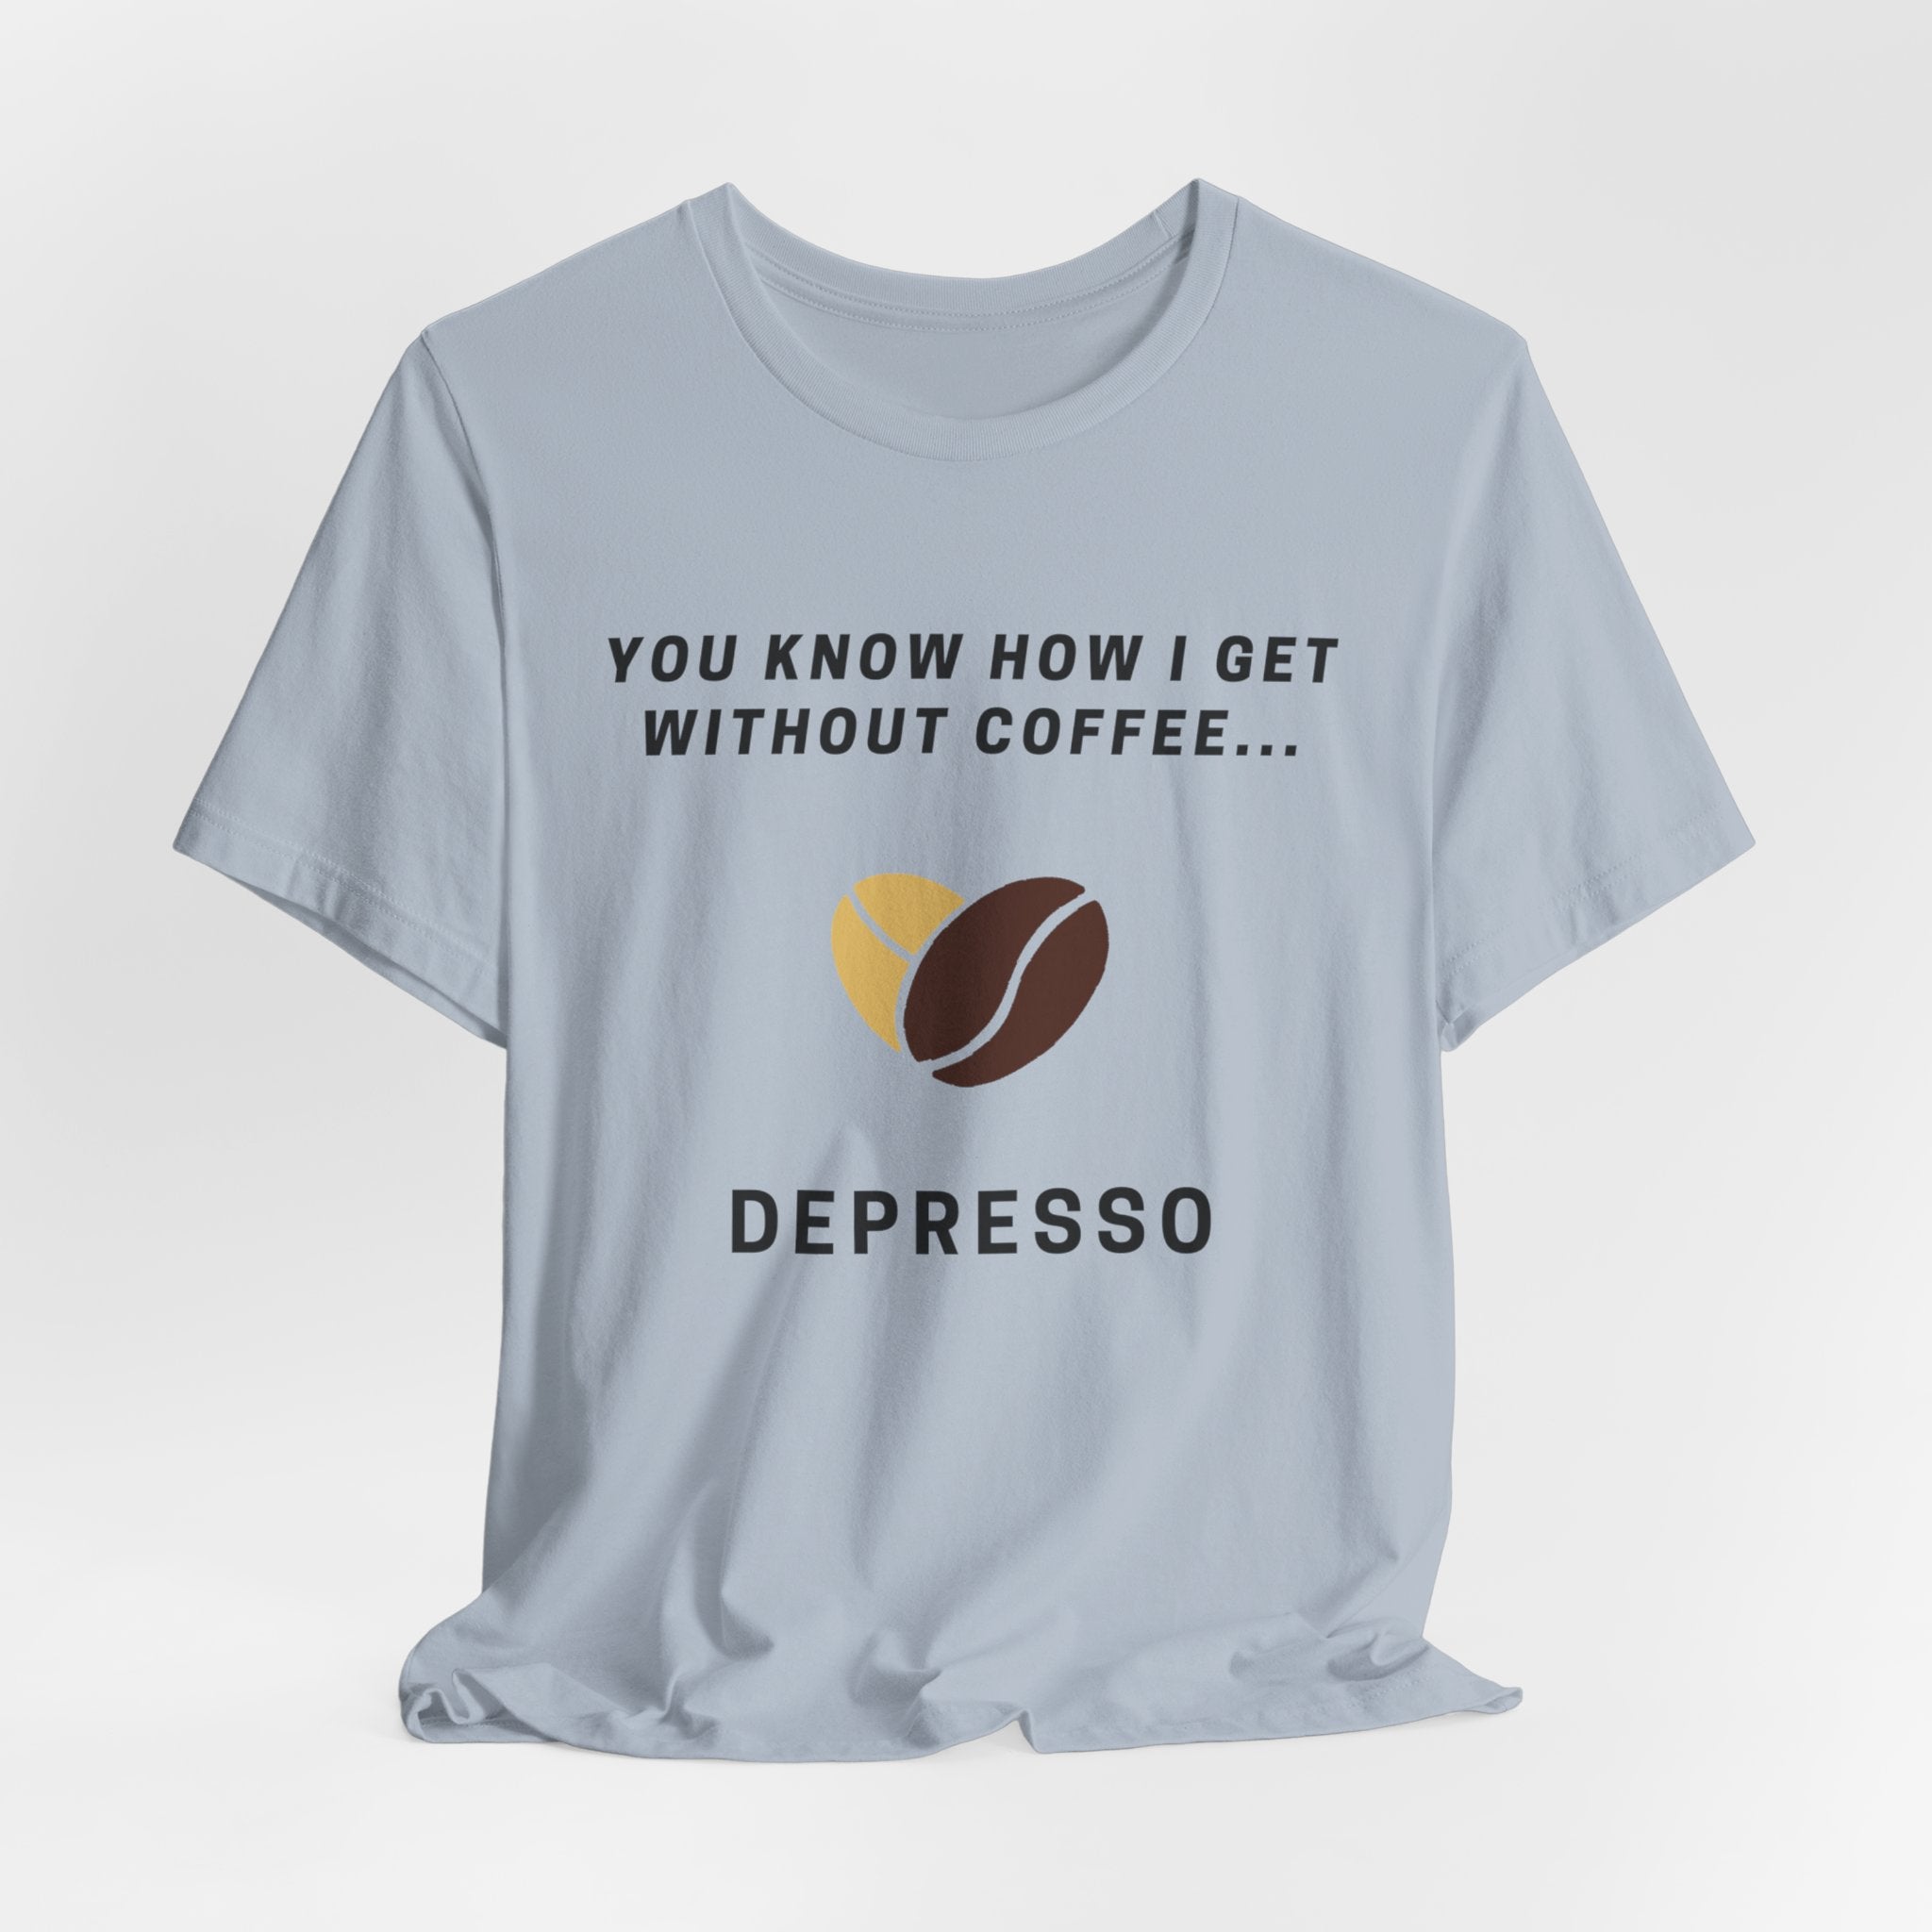 Depresso T-Shirt [FOR People Who Get Depresso Without Espresso]